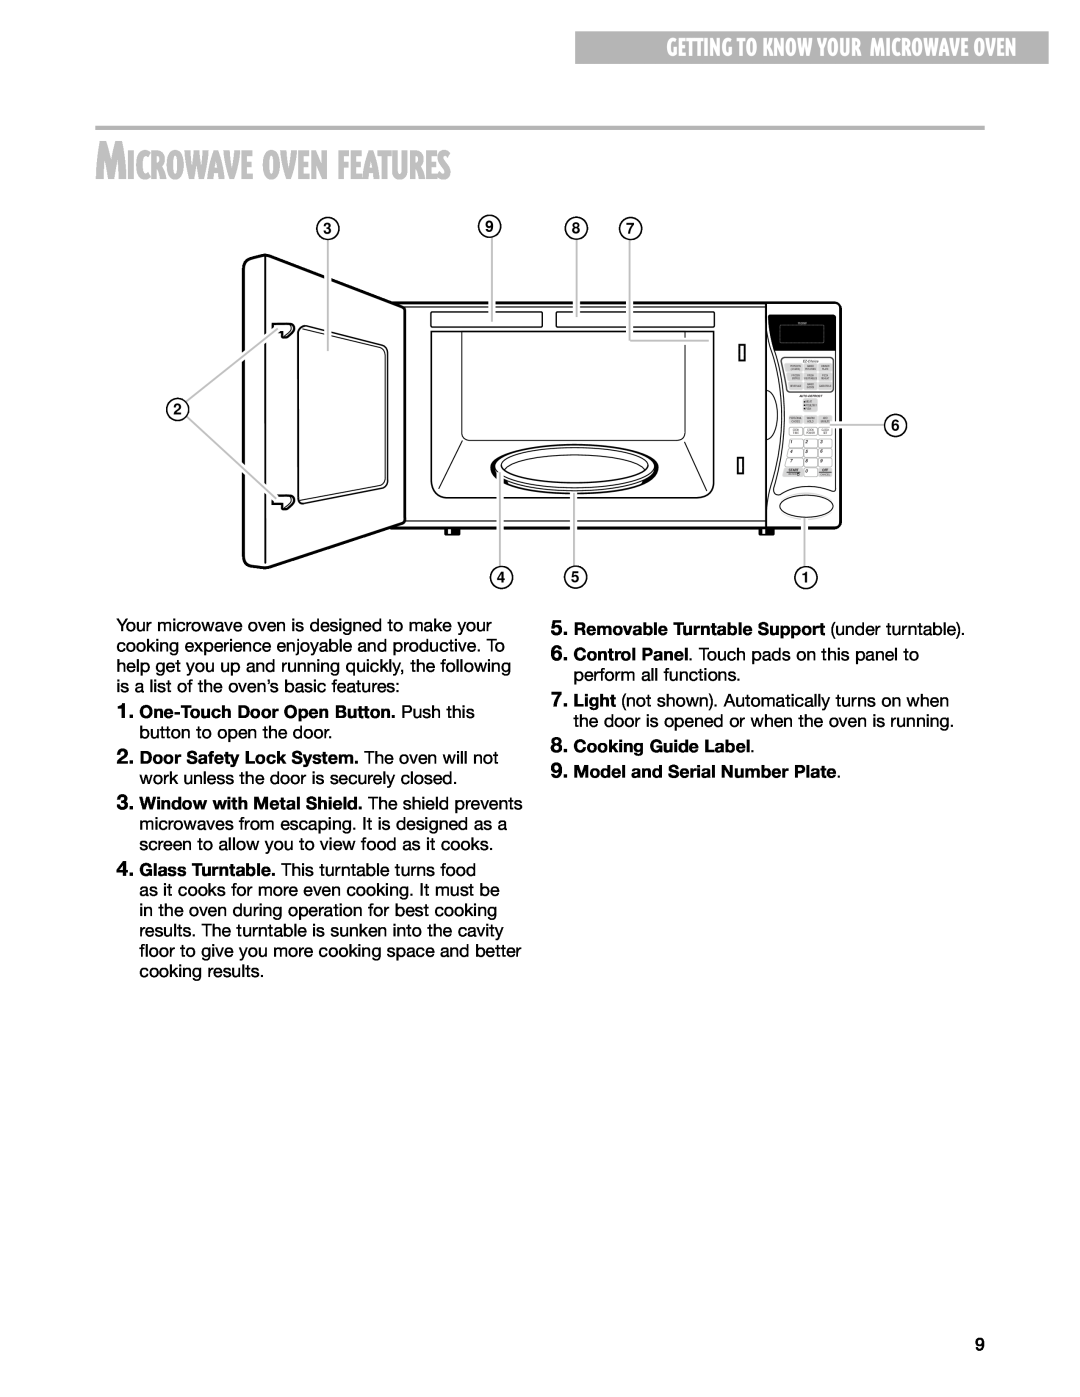 Whirlpool MT1100SH installation instructions Microwave Oven Features, Getting To Know Your Microwave Oven 